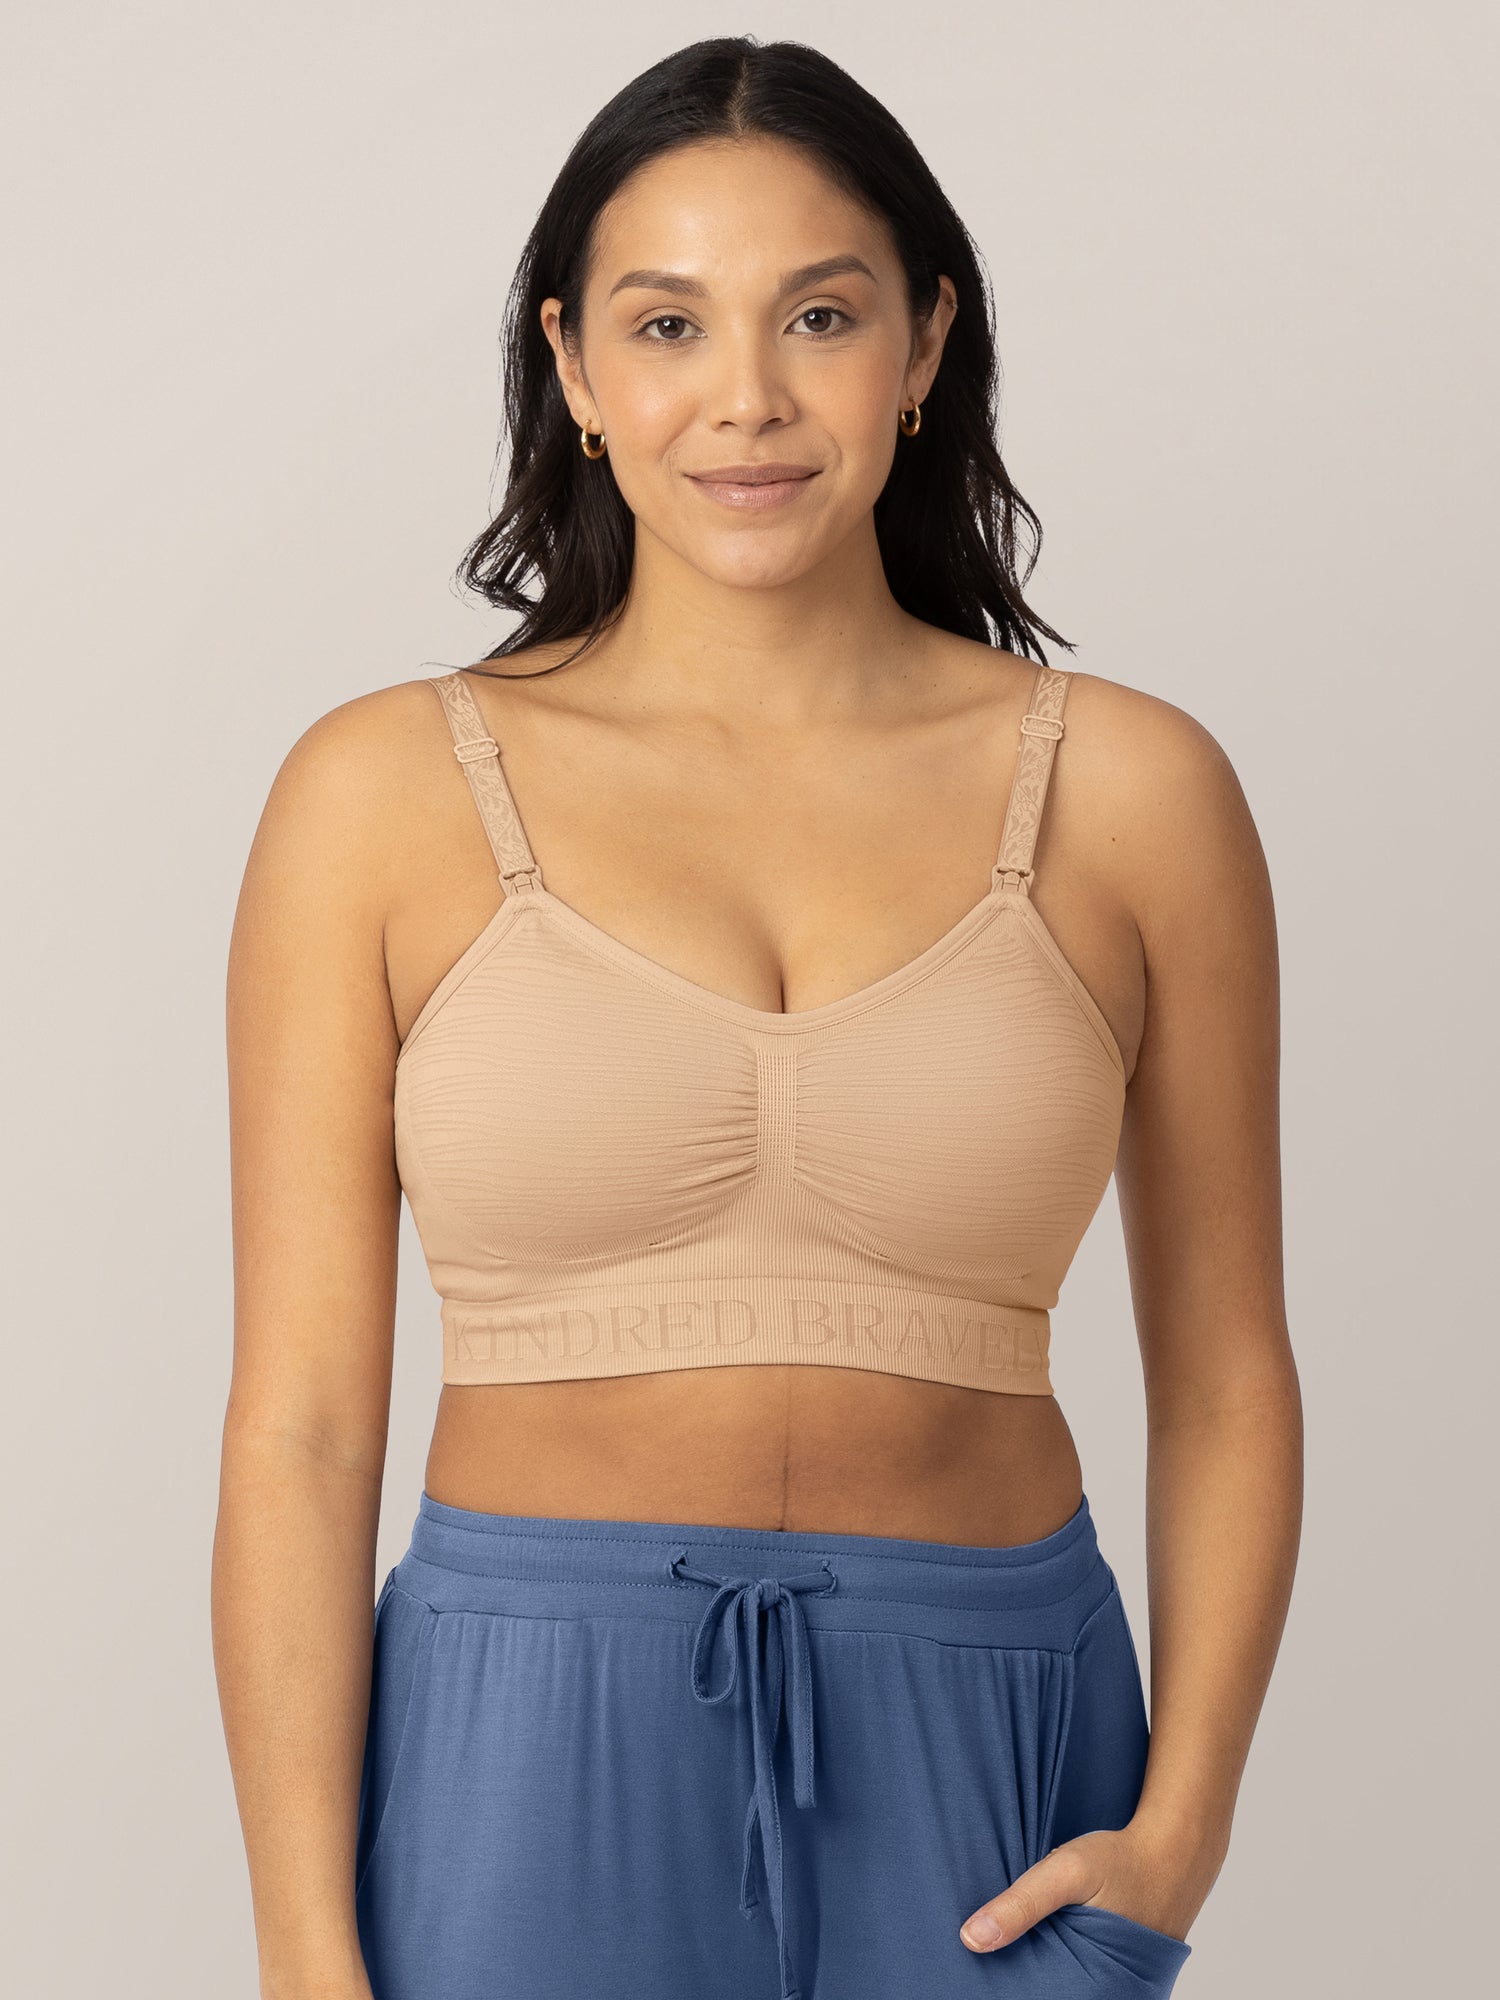 Latched On Mom: Simple Wishes Signature Hands Free Pumping Bra